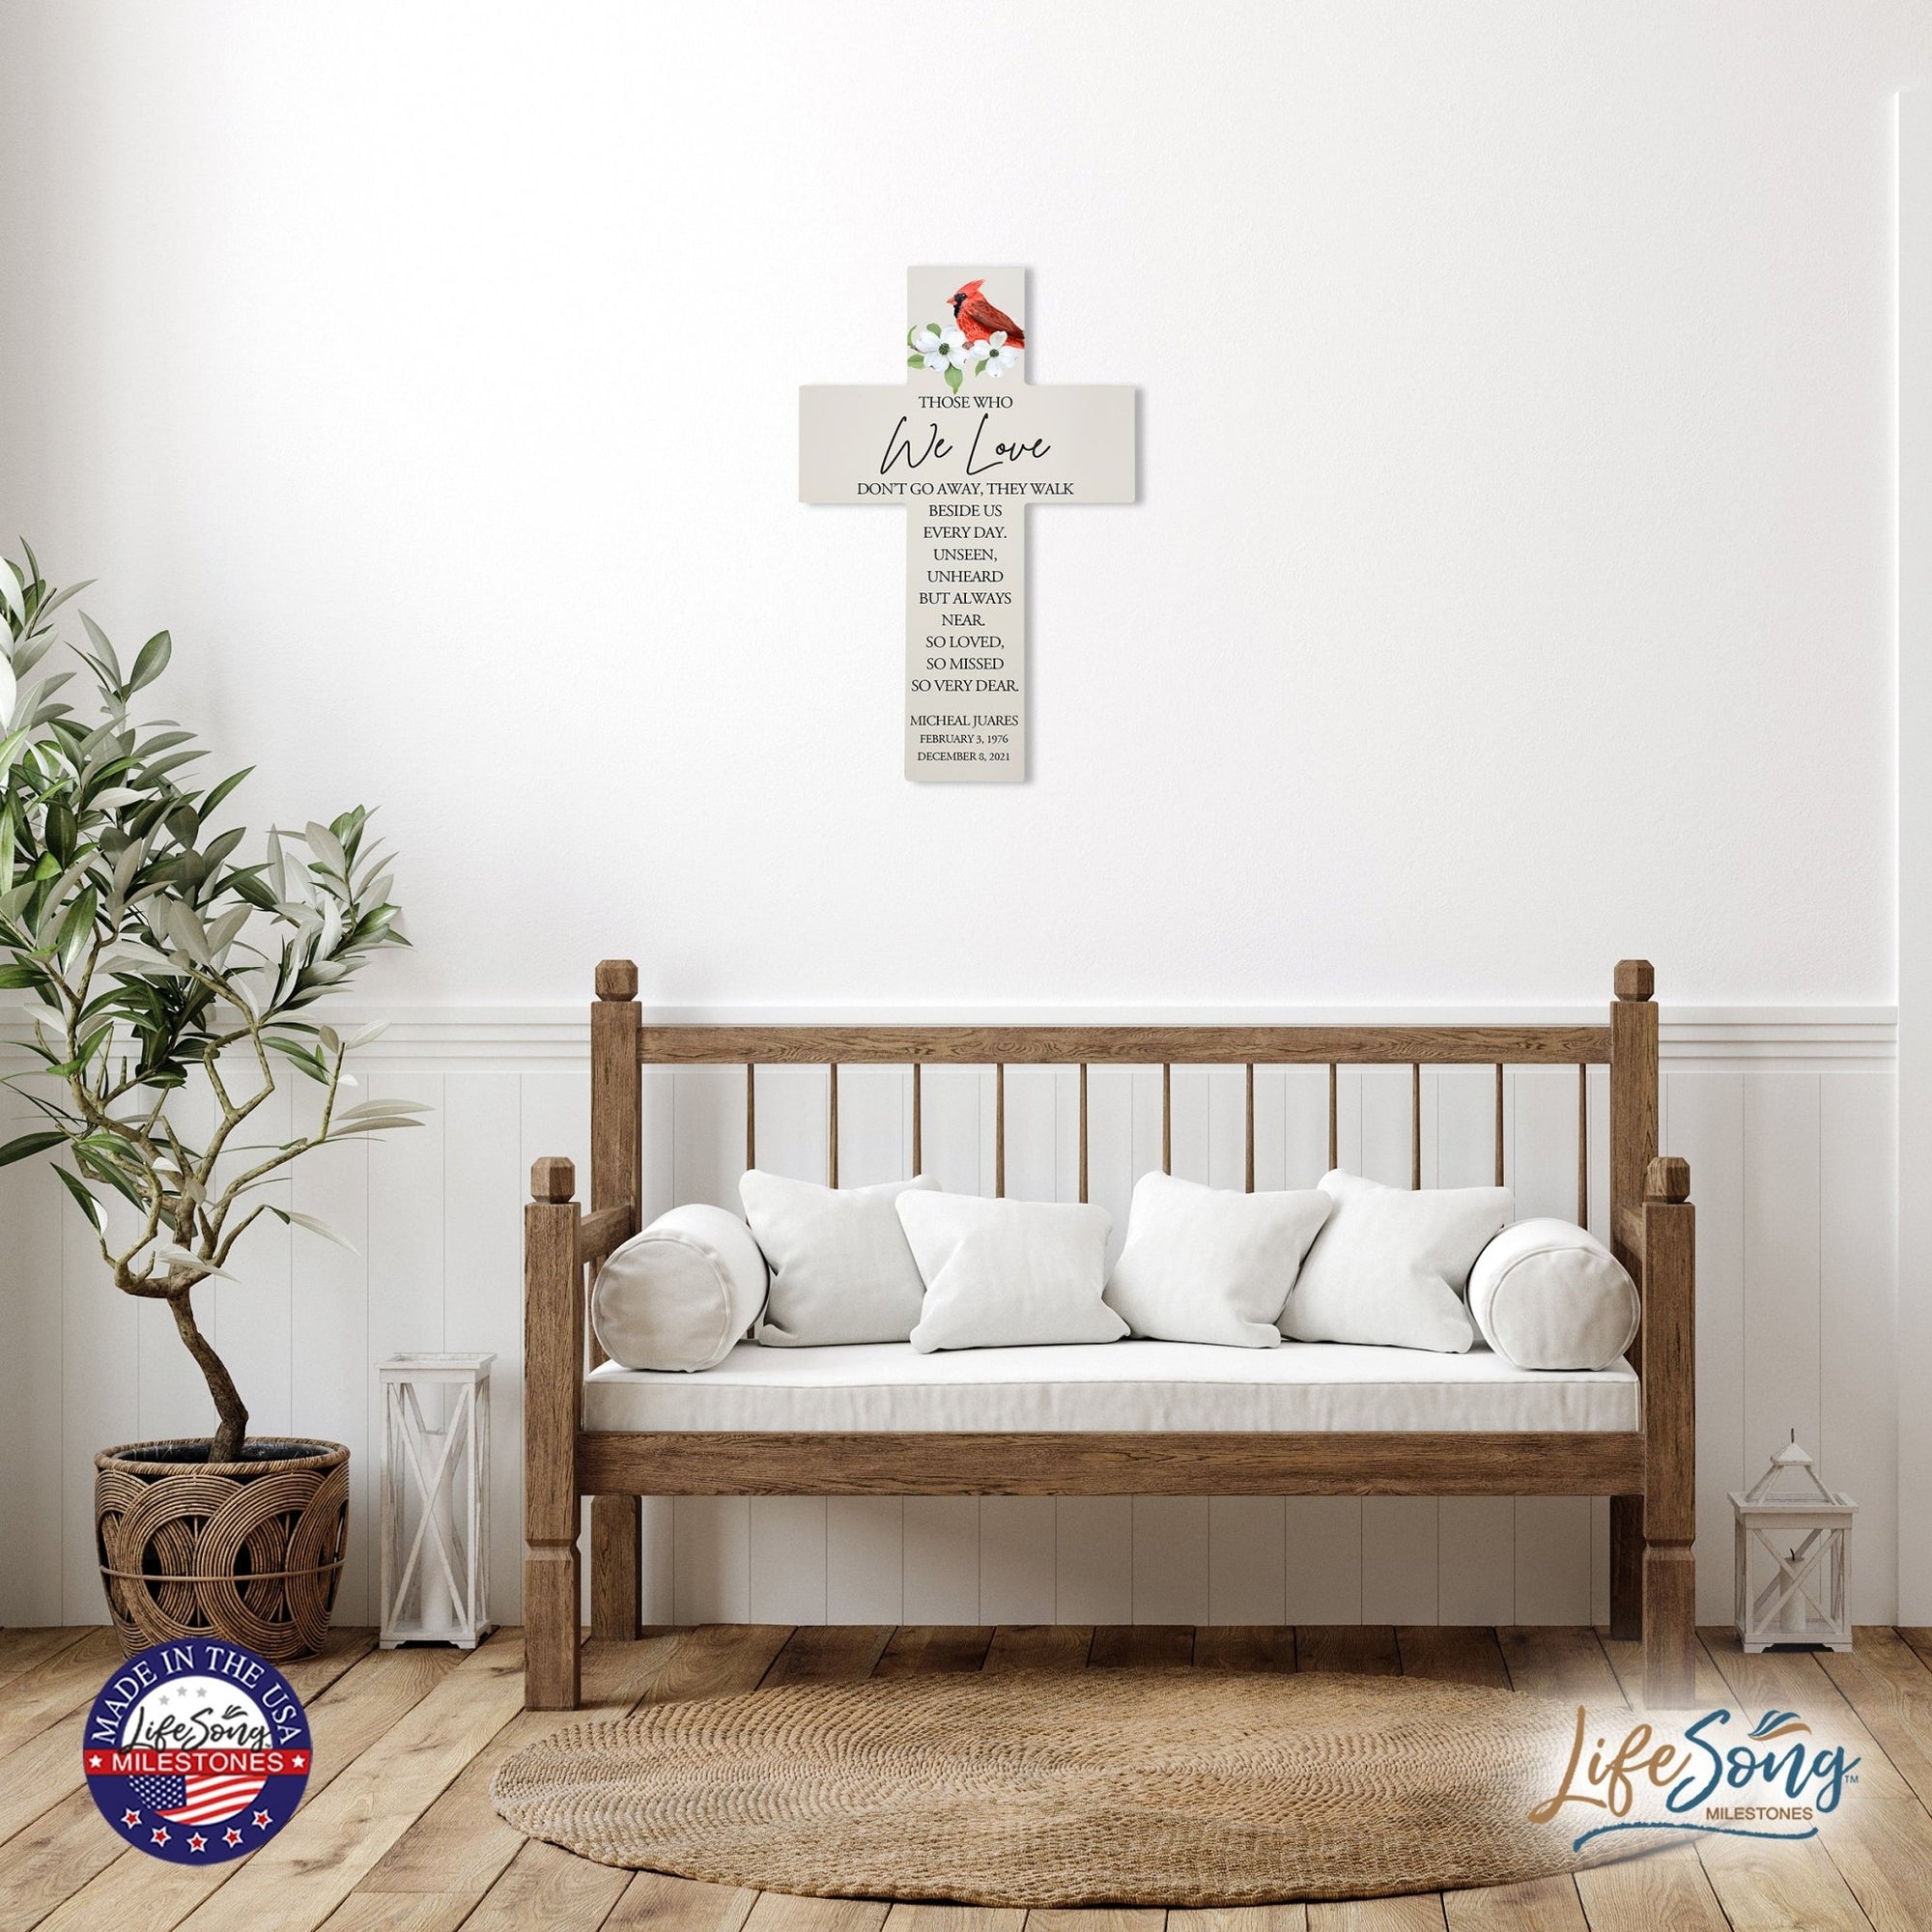 Personalized Red Cardinal Memorial Bereavement Wall Cross For Loss of Loved One Those Who We Love (Cardinal) Quote 14 x 9.25 Those Who We Love Don't Go Away, They Walk Beside Us Everyday - LifeSong Milestones